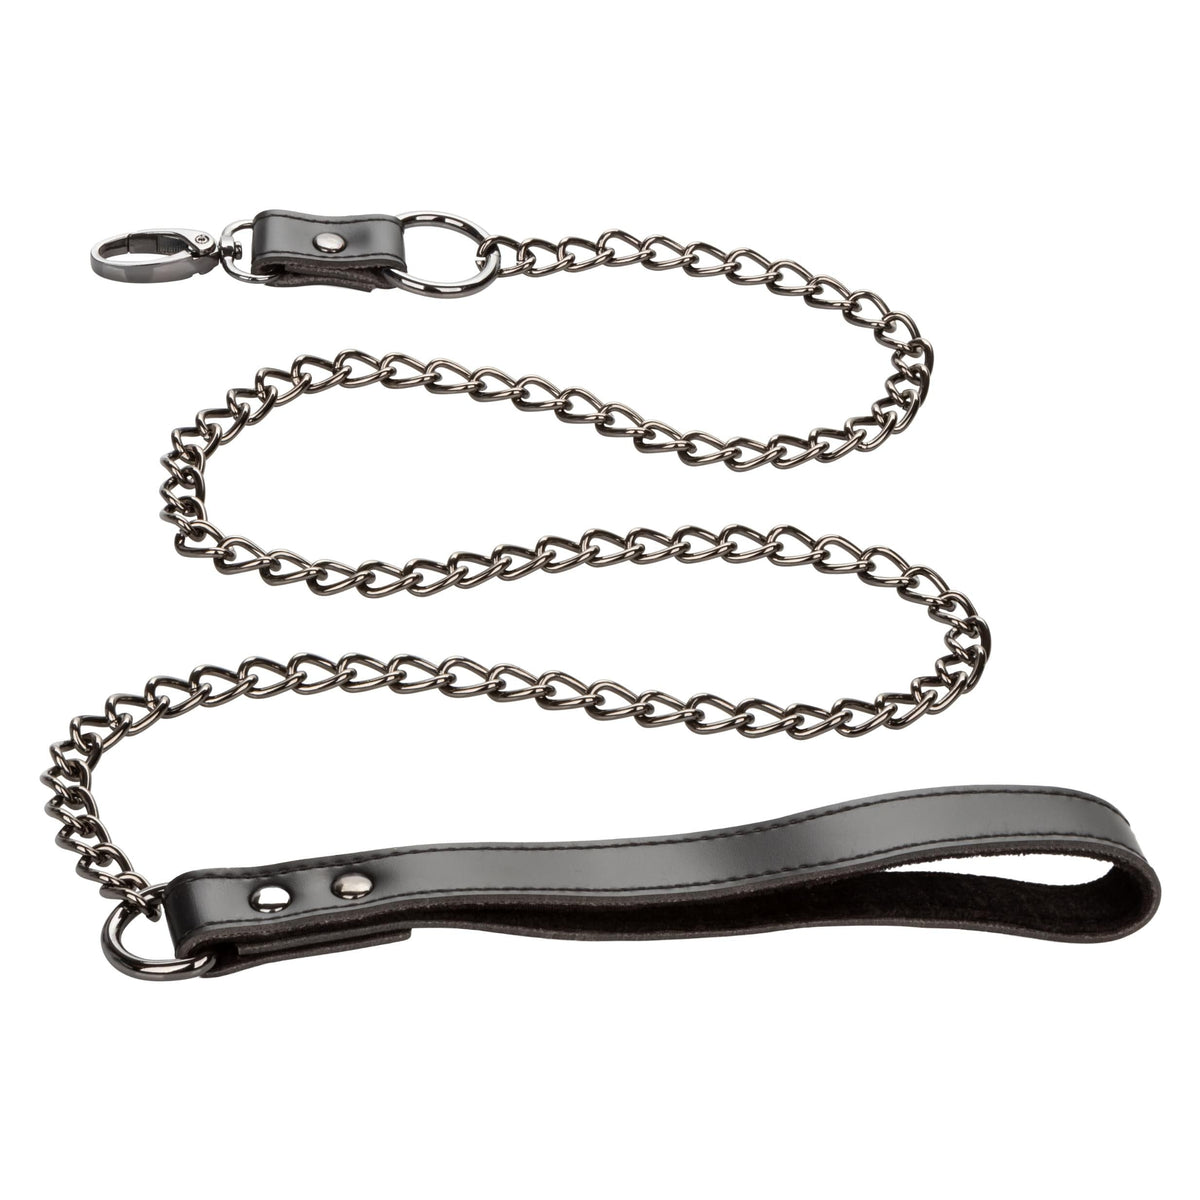 euphoria collection collar with chain leash black